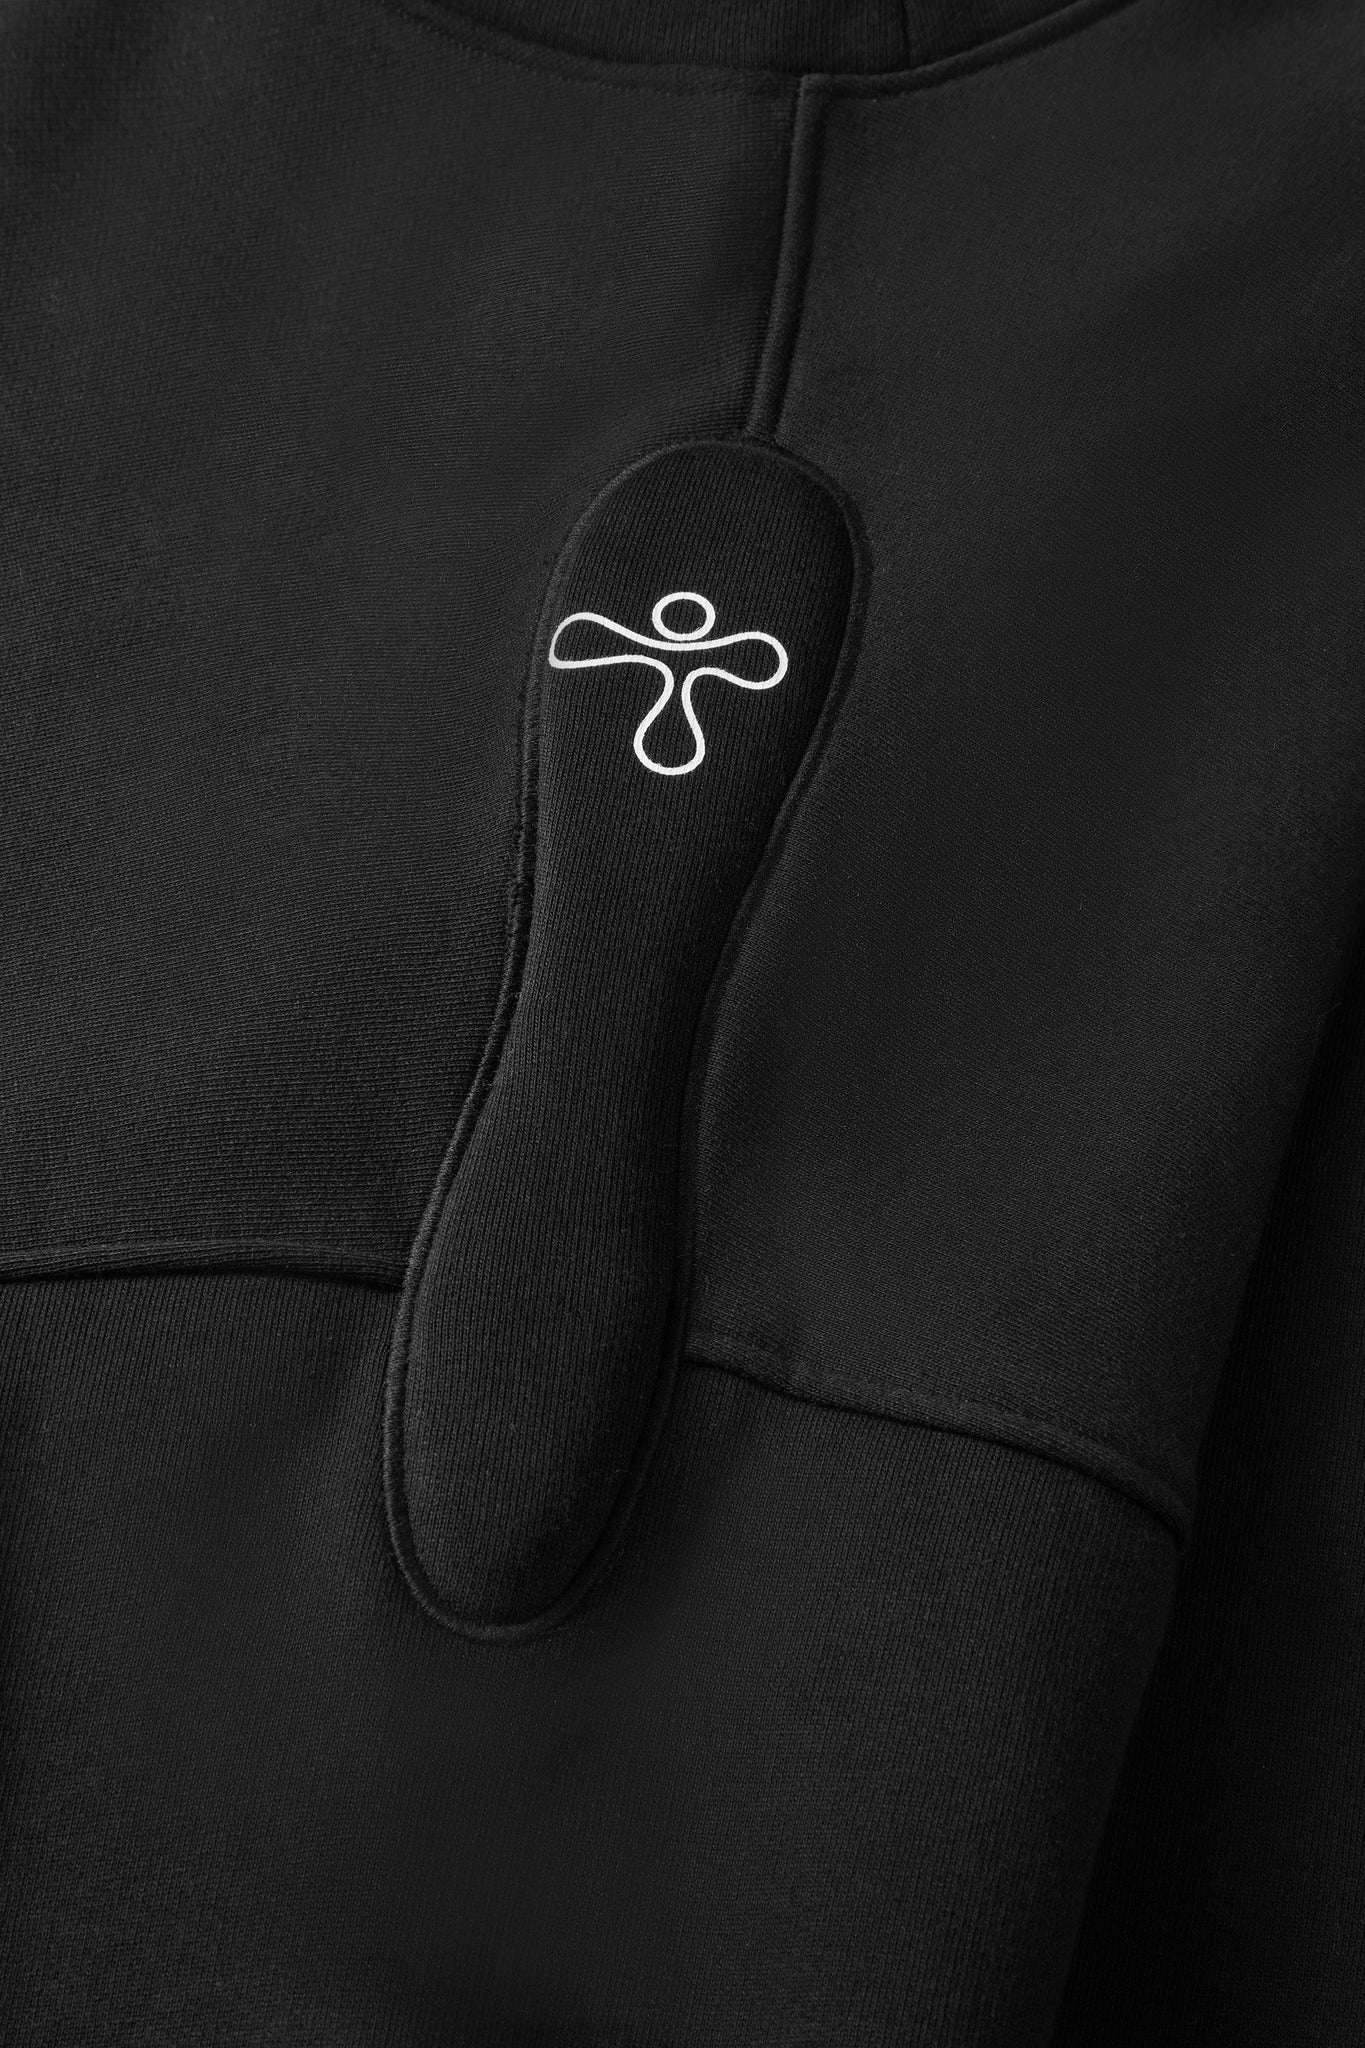 alt="detail of black sweater with padded embroidered detail and print"